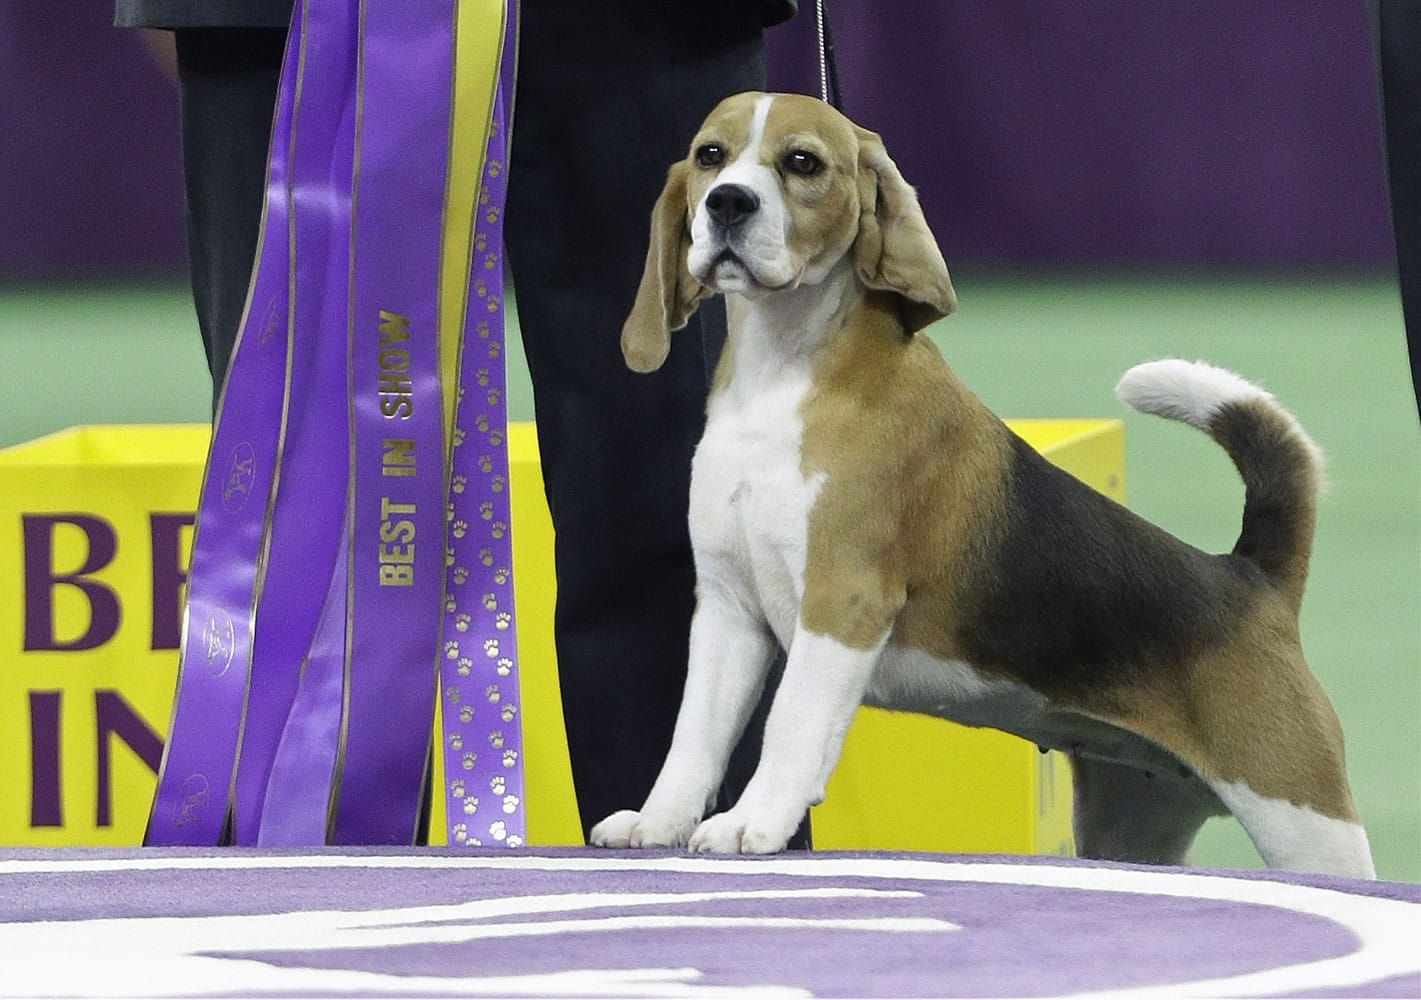 Miss P, a 15-inch beagle, with handler William Alexander, won Best in Show at the Westminster Kennel Club dog show Tuesday in New York.